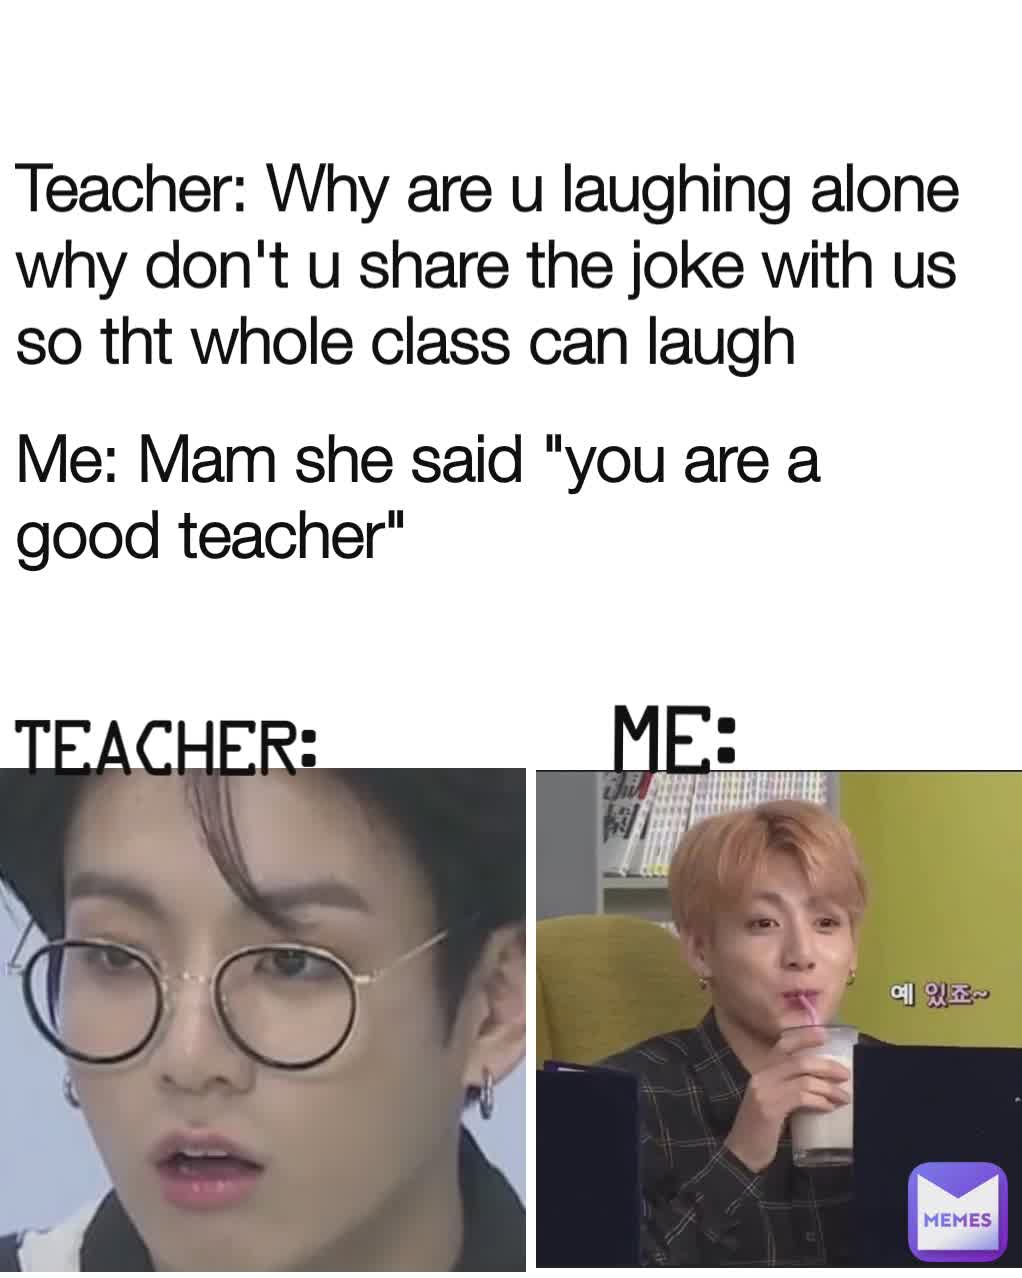 Teacher: Teacher: Why are u laughing alone why don't u share the joke with us so tht whole class can laugh ME: Me: Mam she said "you are a good teacher"